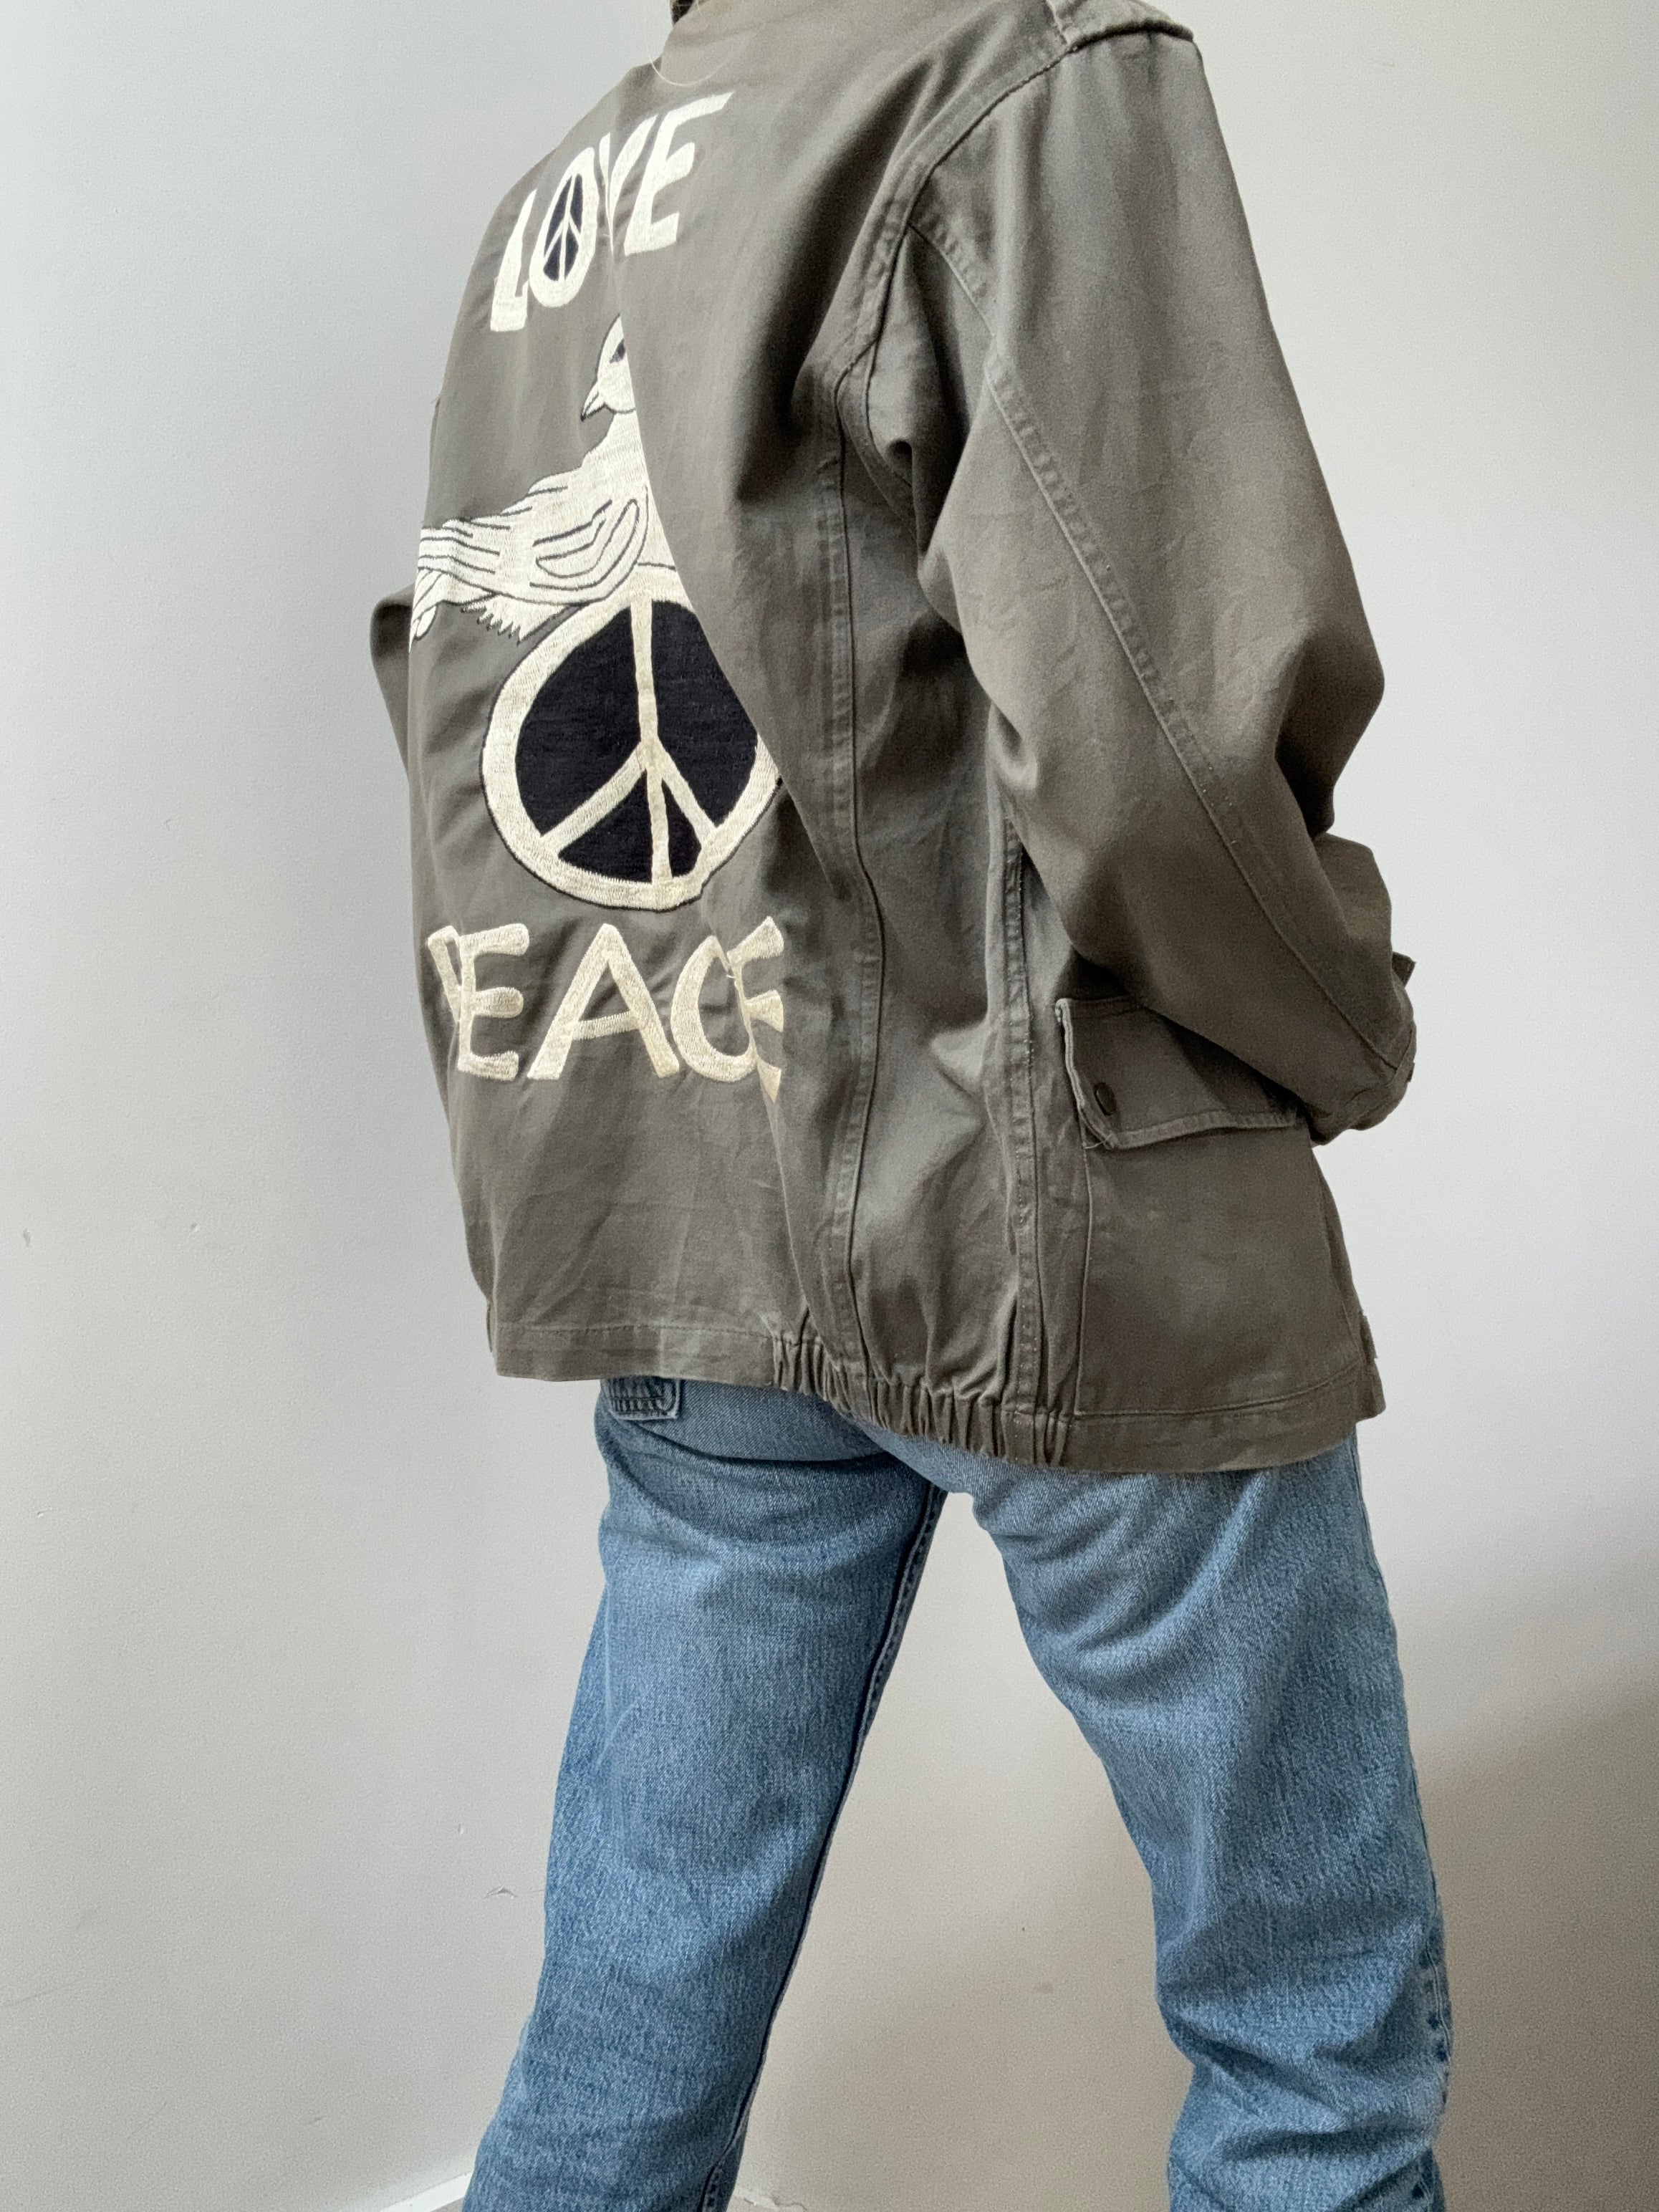 Future Nomads Jackets Small Love Peace Army Jacket Zipper Front AW24